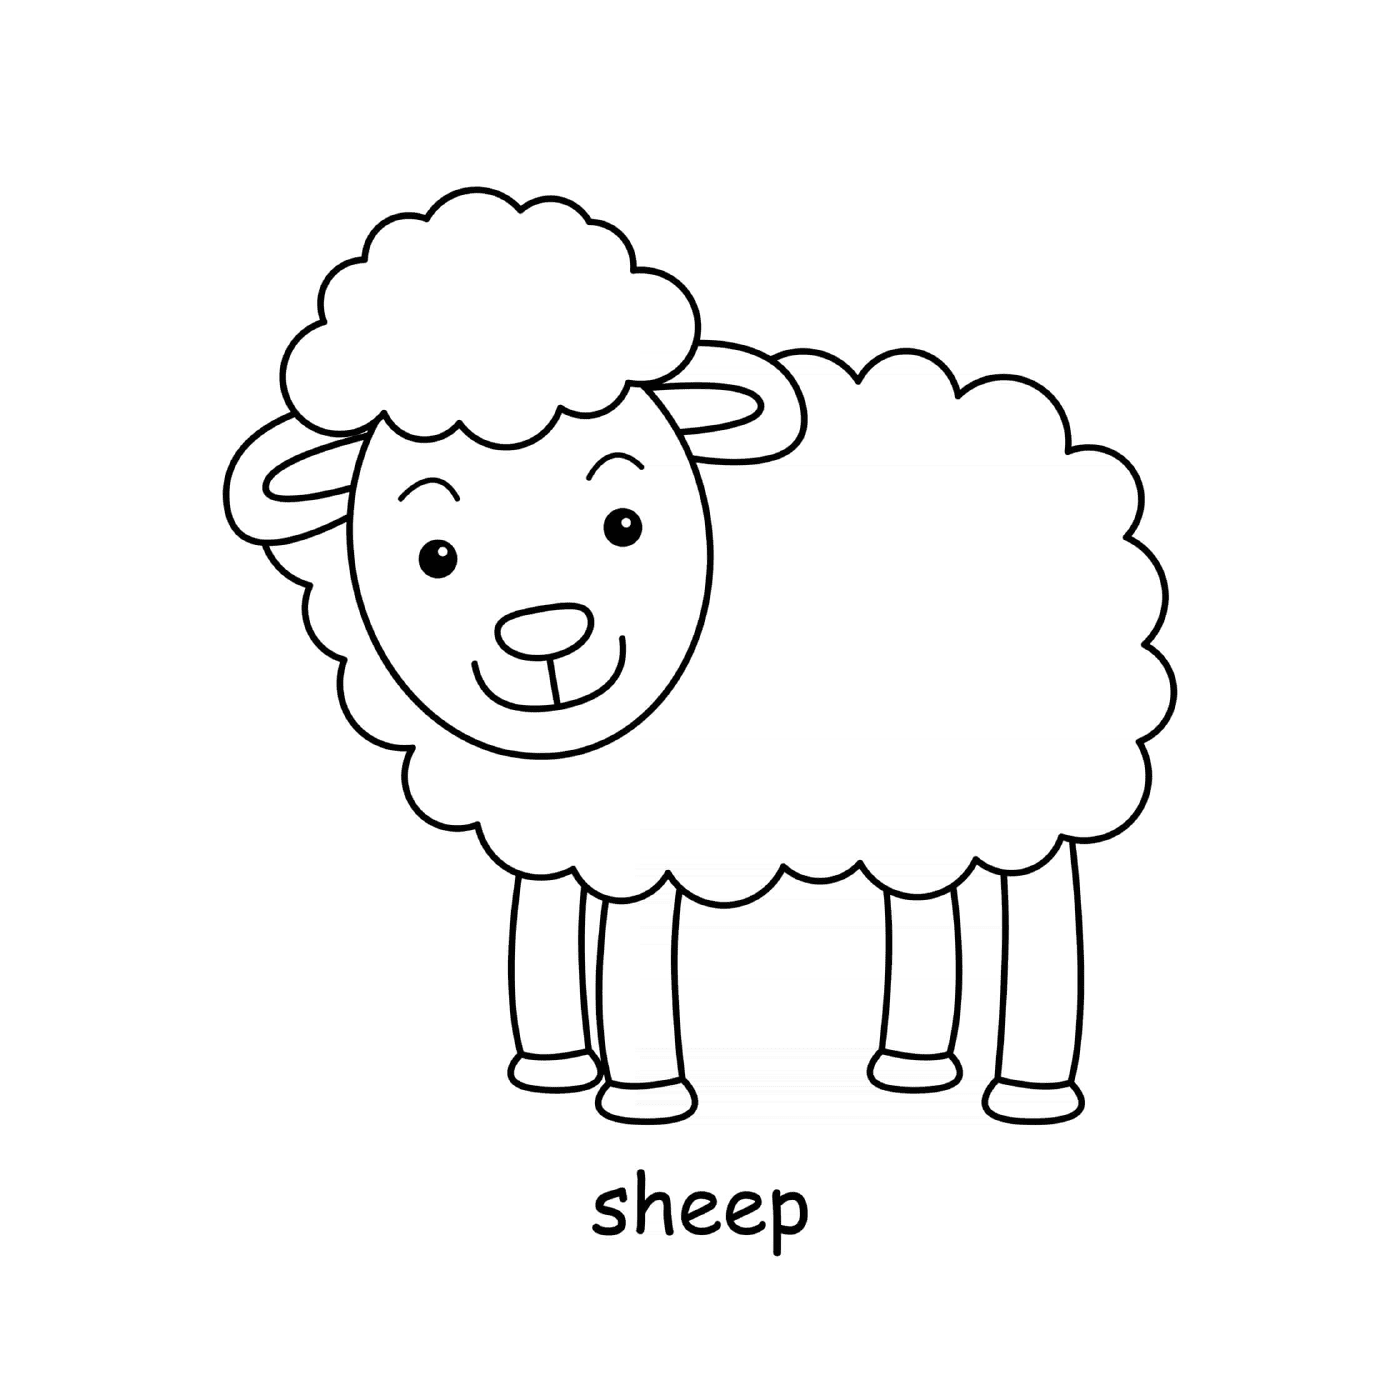  Animal sheep from the farm 